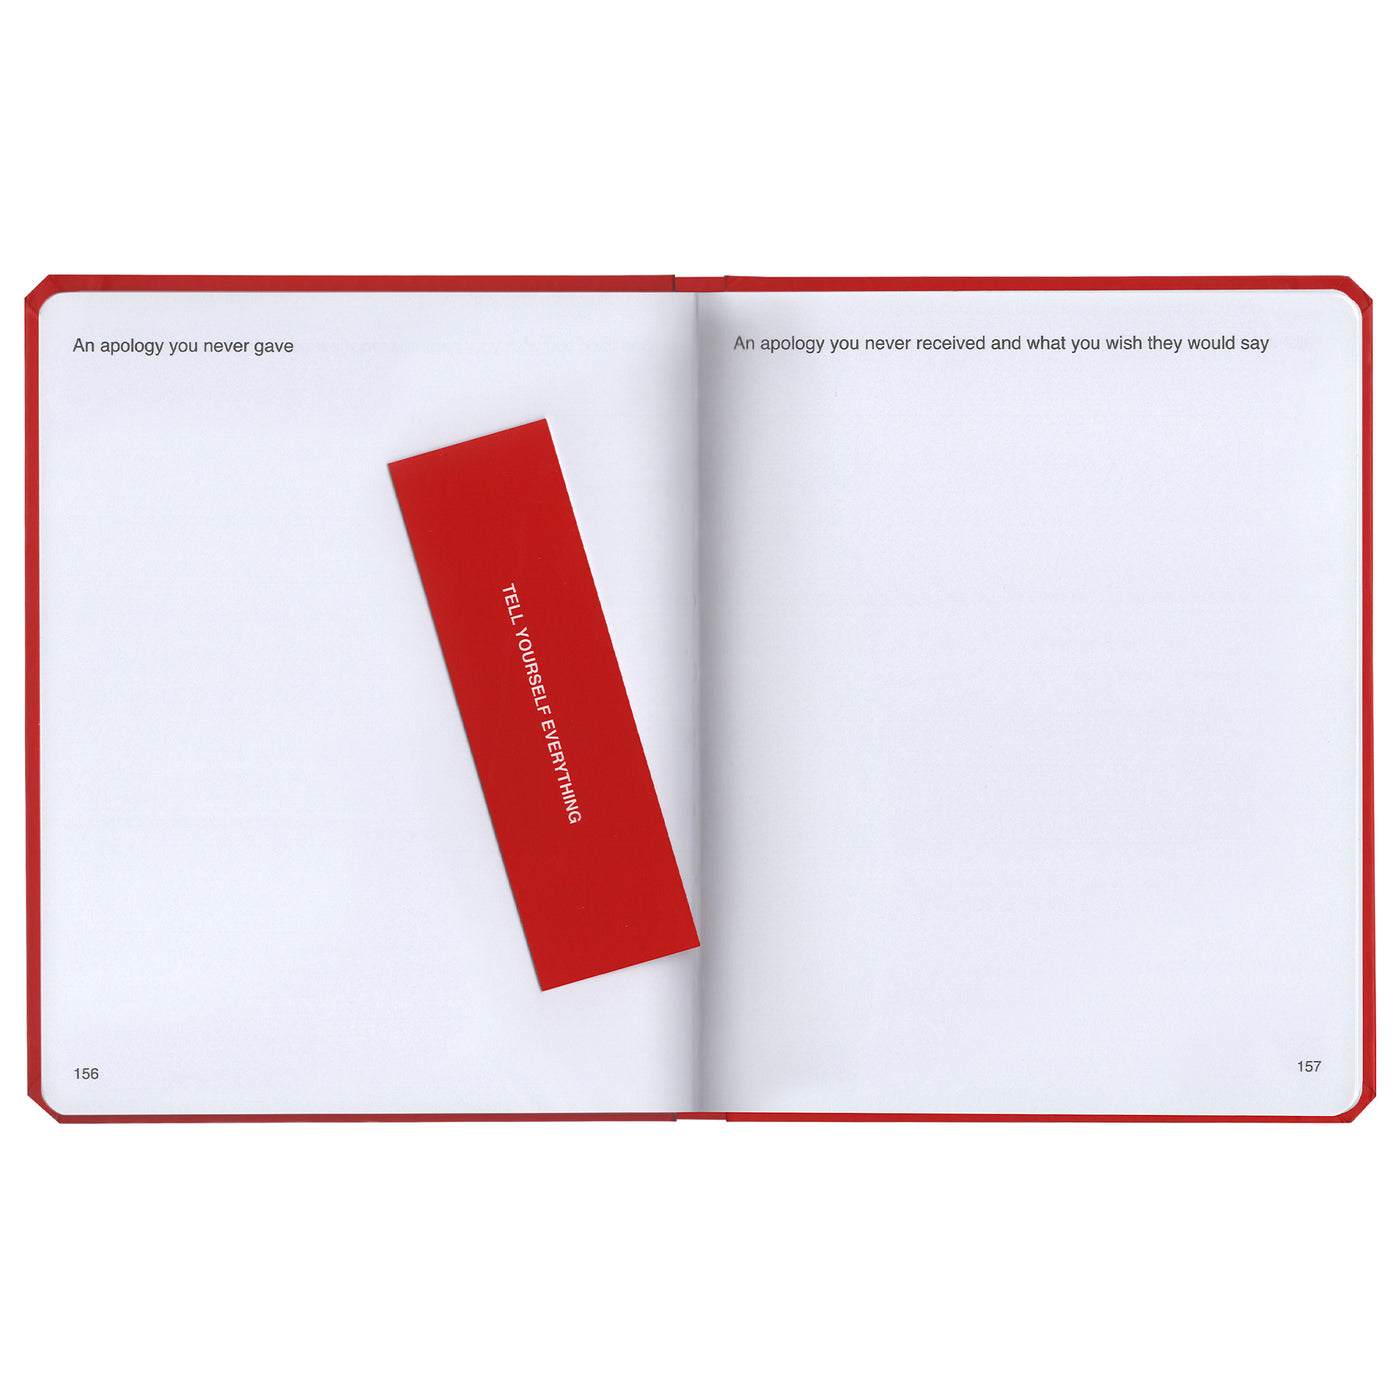 We're Not Really Strangers Journal. Front facing view of inside of journal blank pages showing two prompts reading "An apology you never gave" and "An apology you never received and what you wish they would say." With a red bookmark reading "Tell yourself everything" in white font.